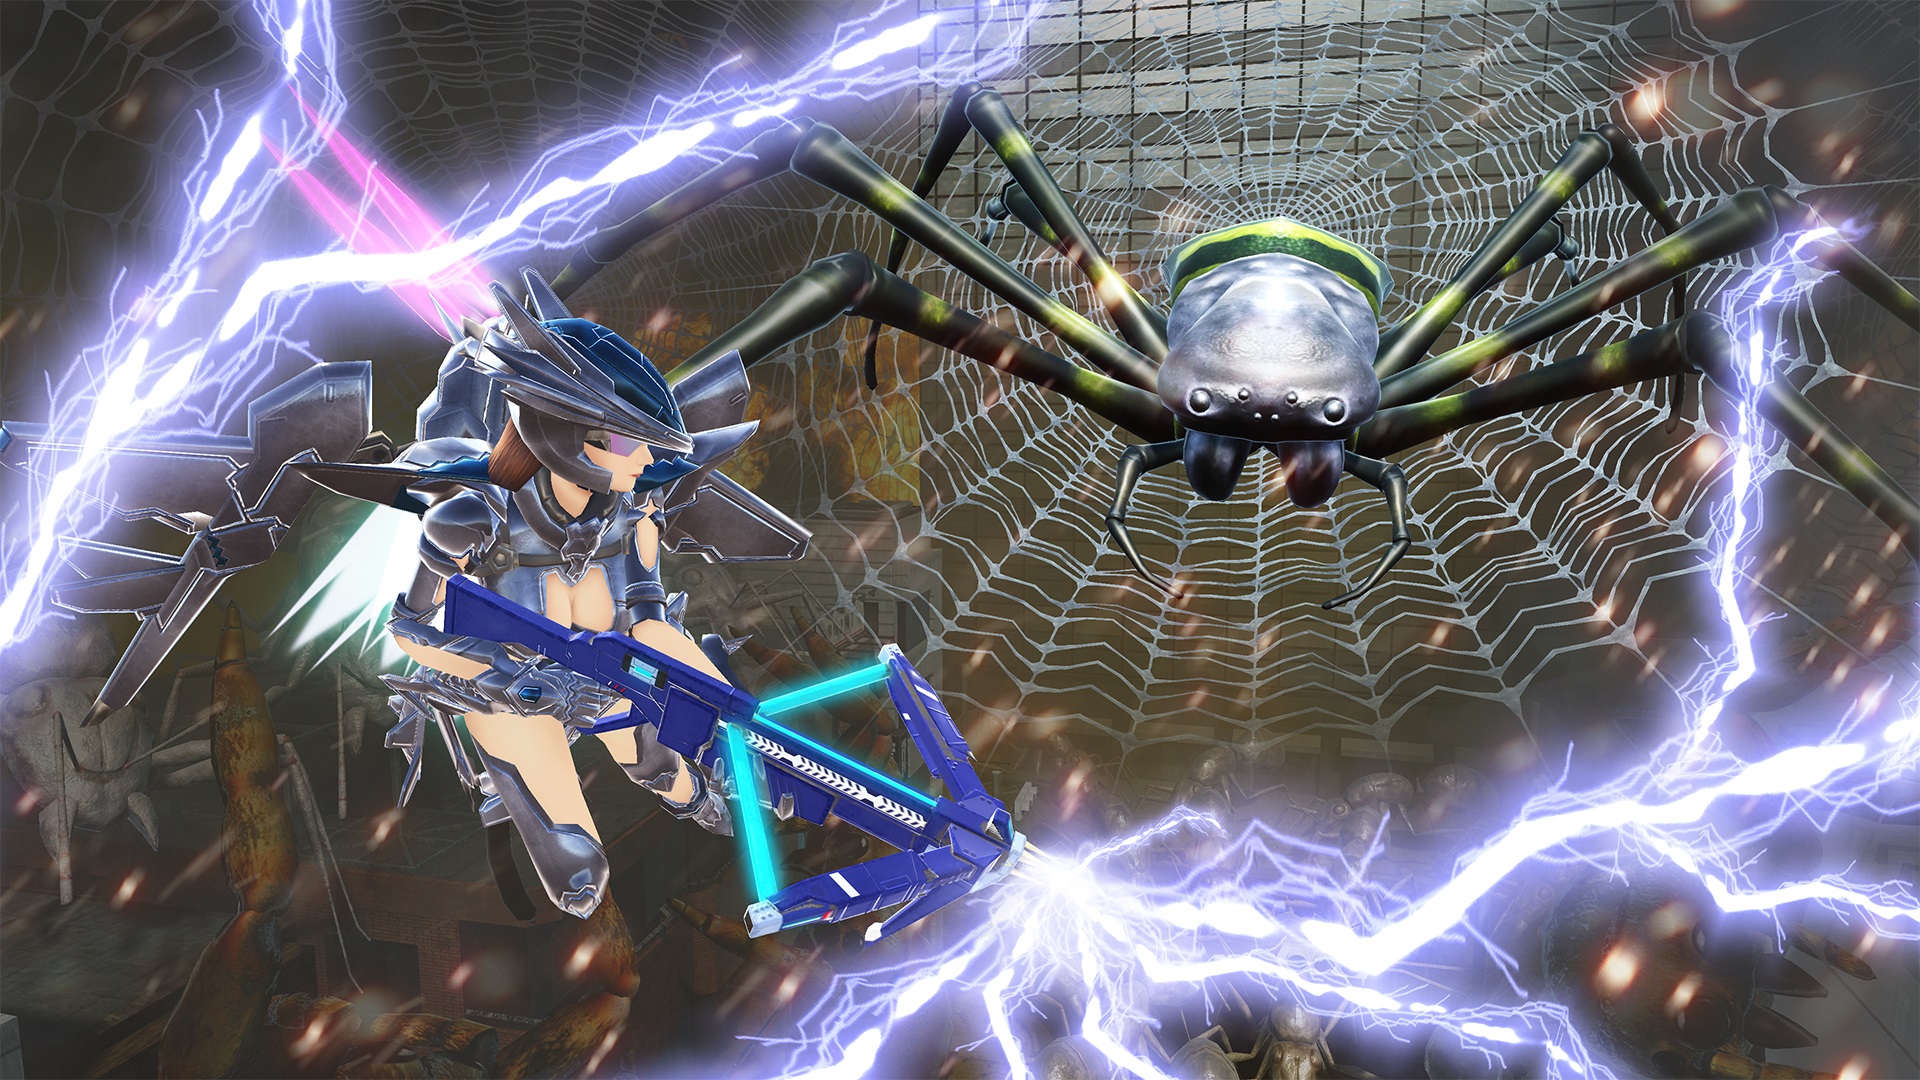 Earth Defense Force 4.1: Wingdiver the Shooter